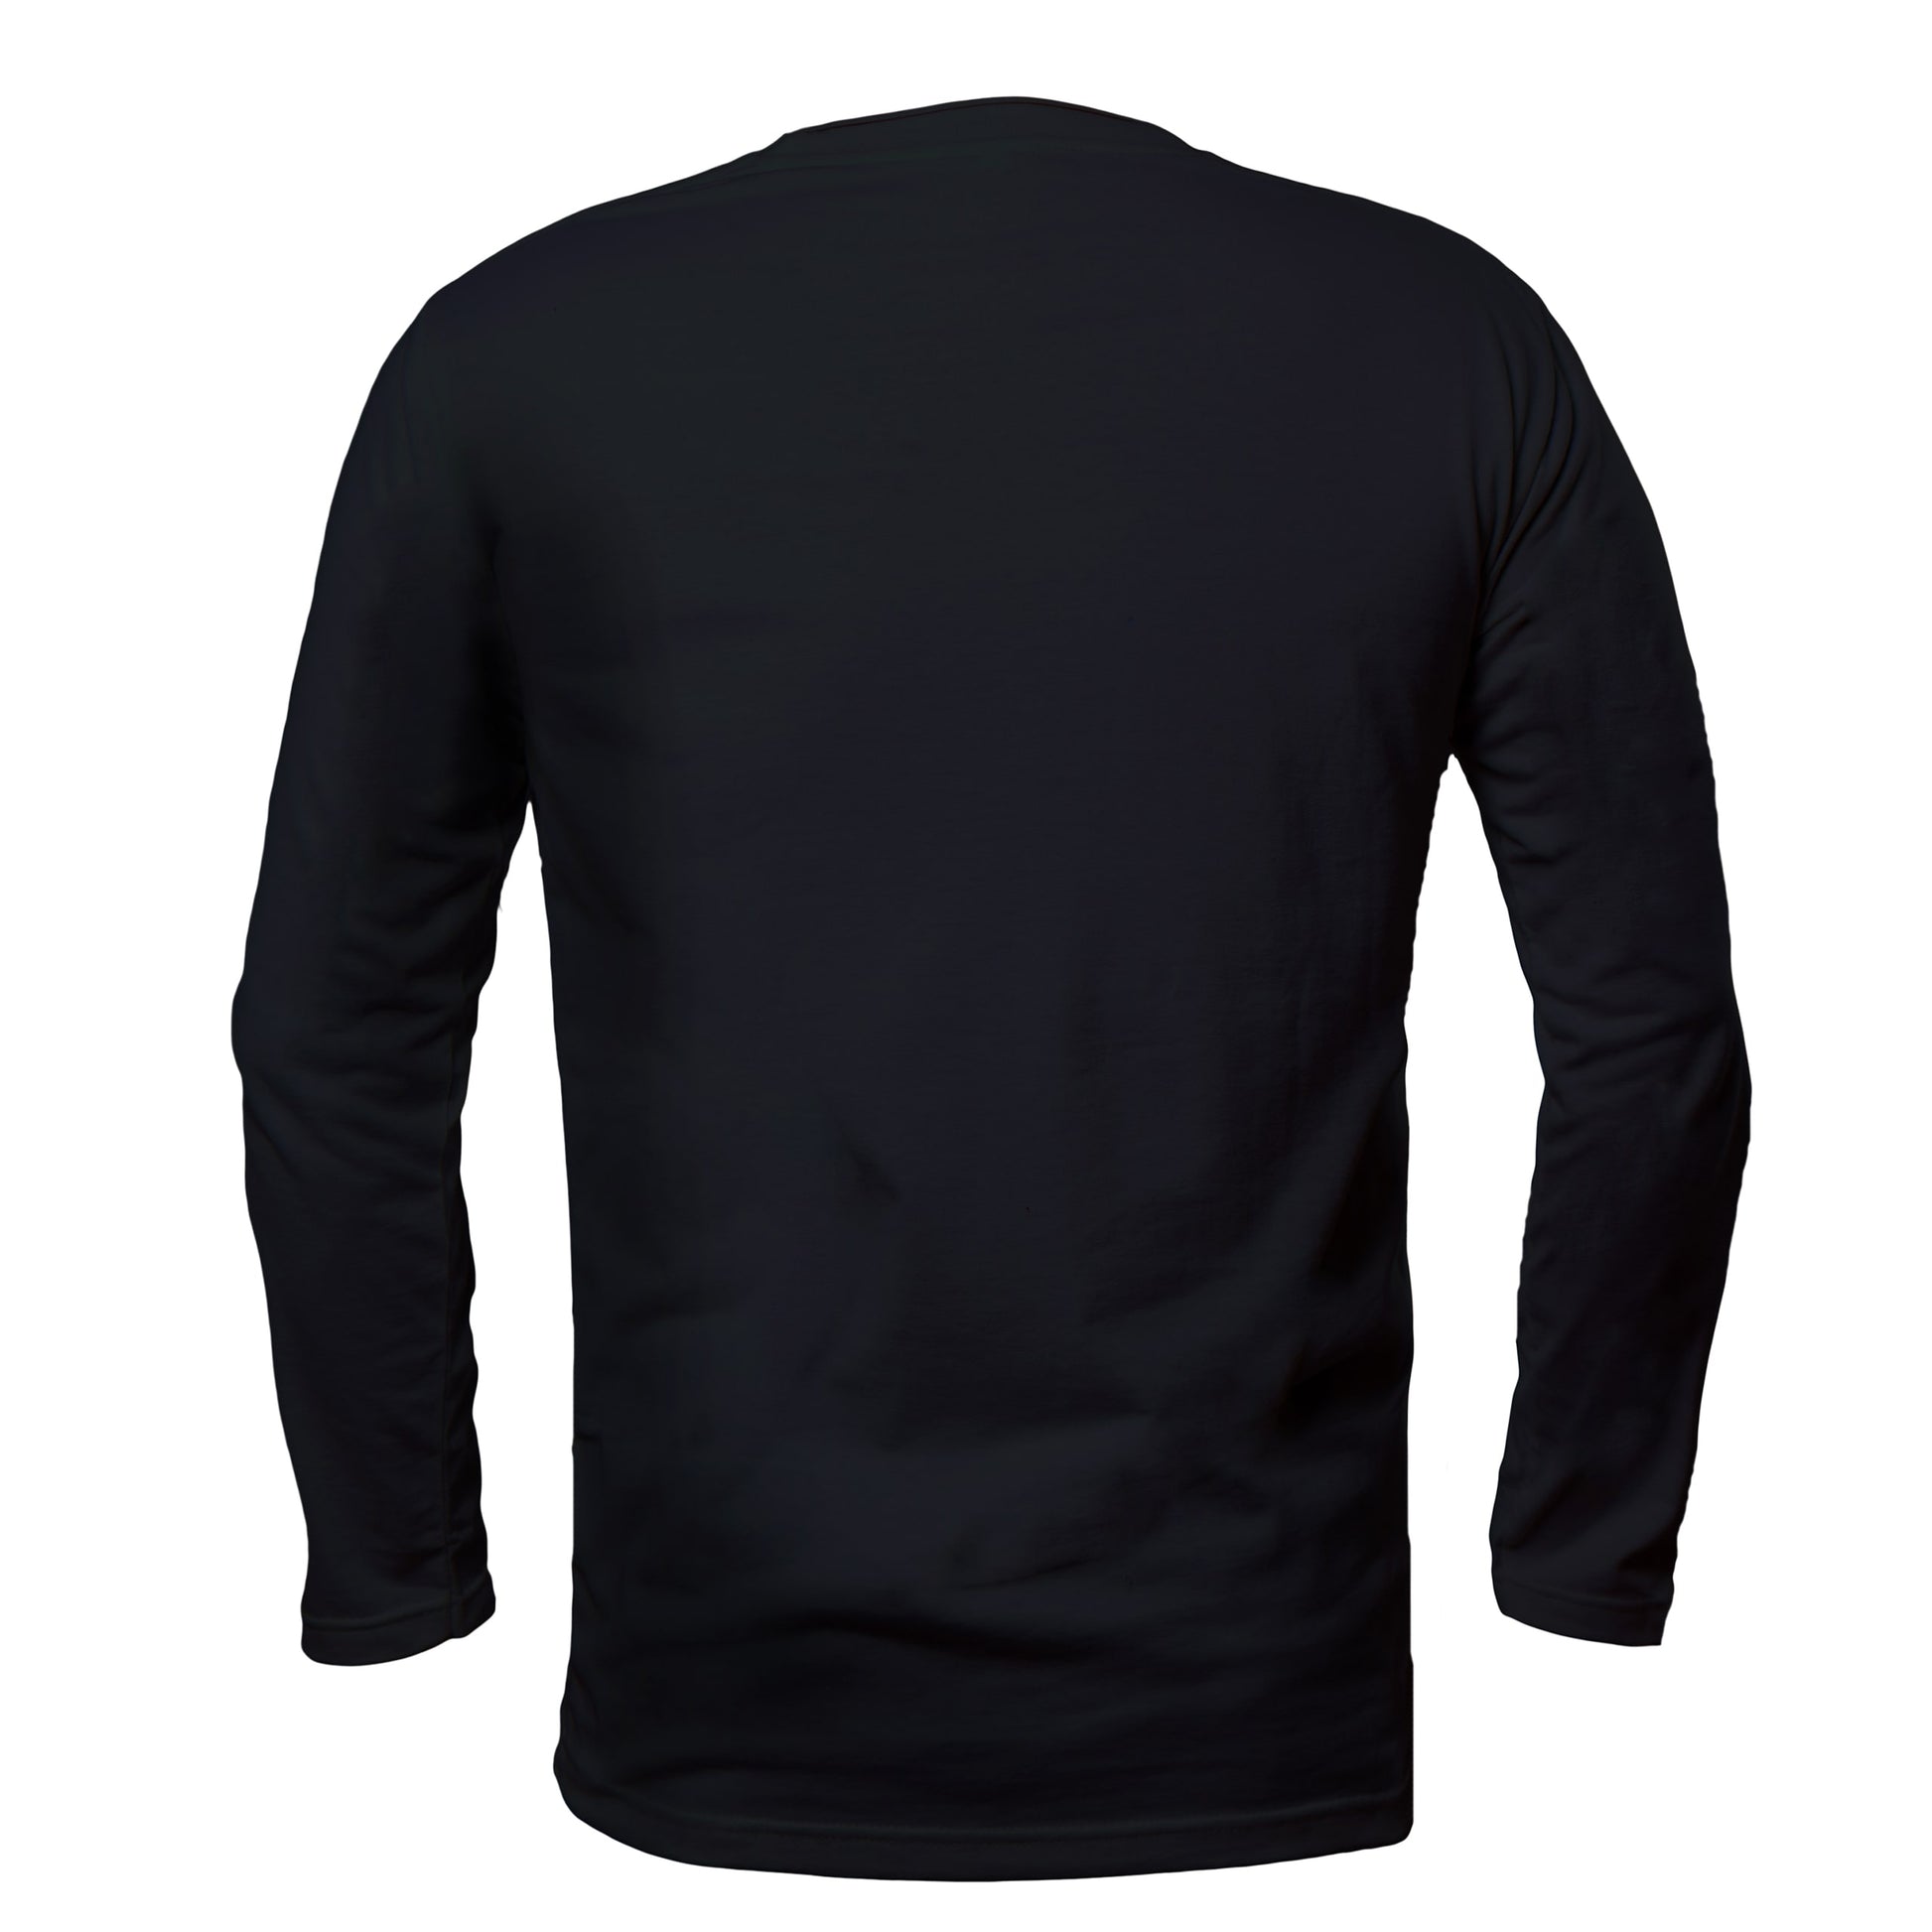 The back view of a Guinness UK Guinness Black Trademark Label Long Sleeve T-Shirt.